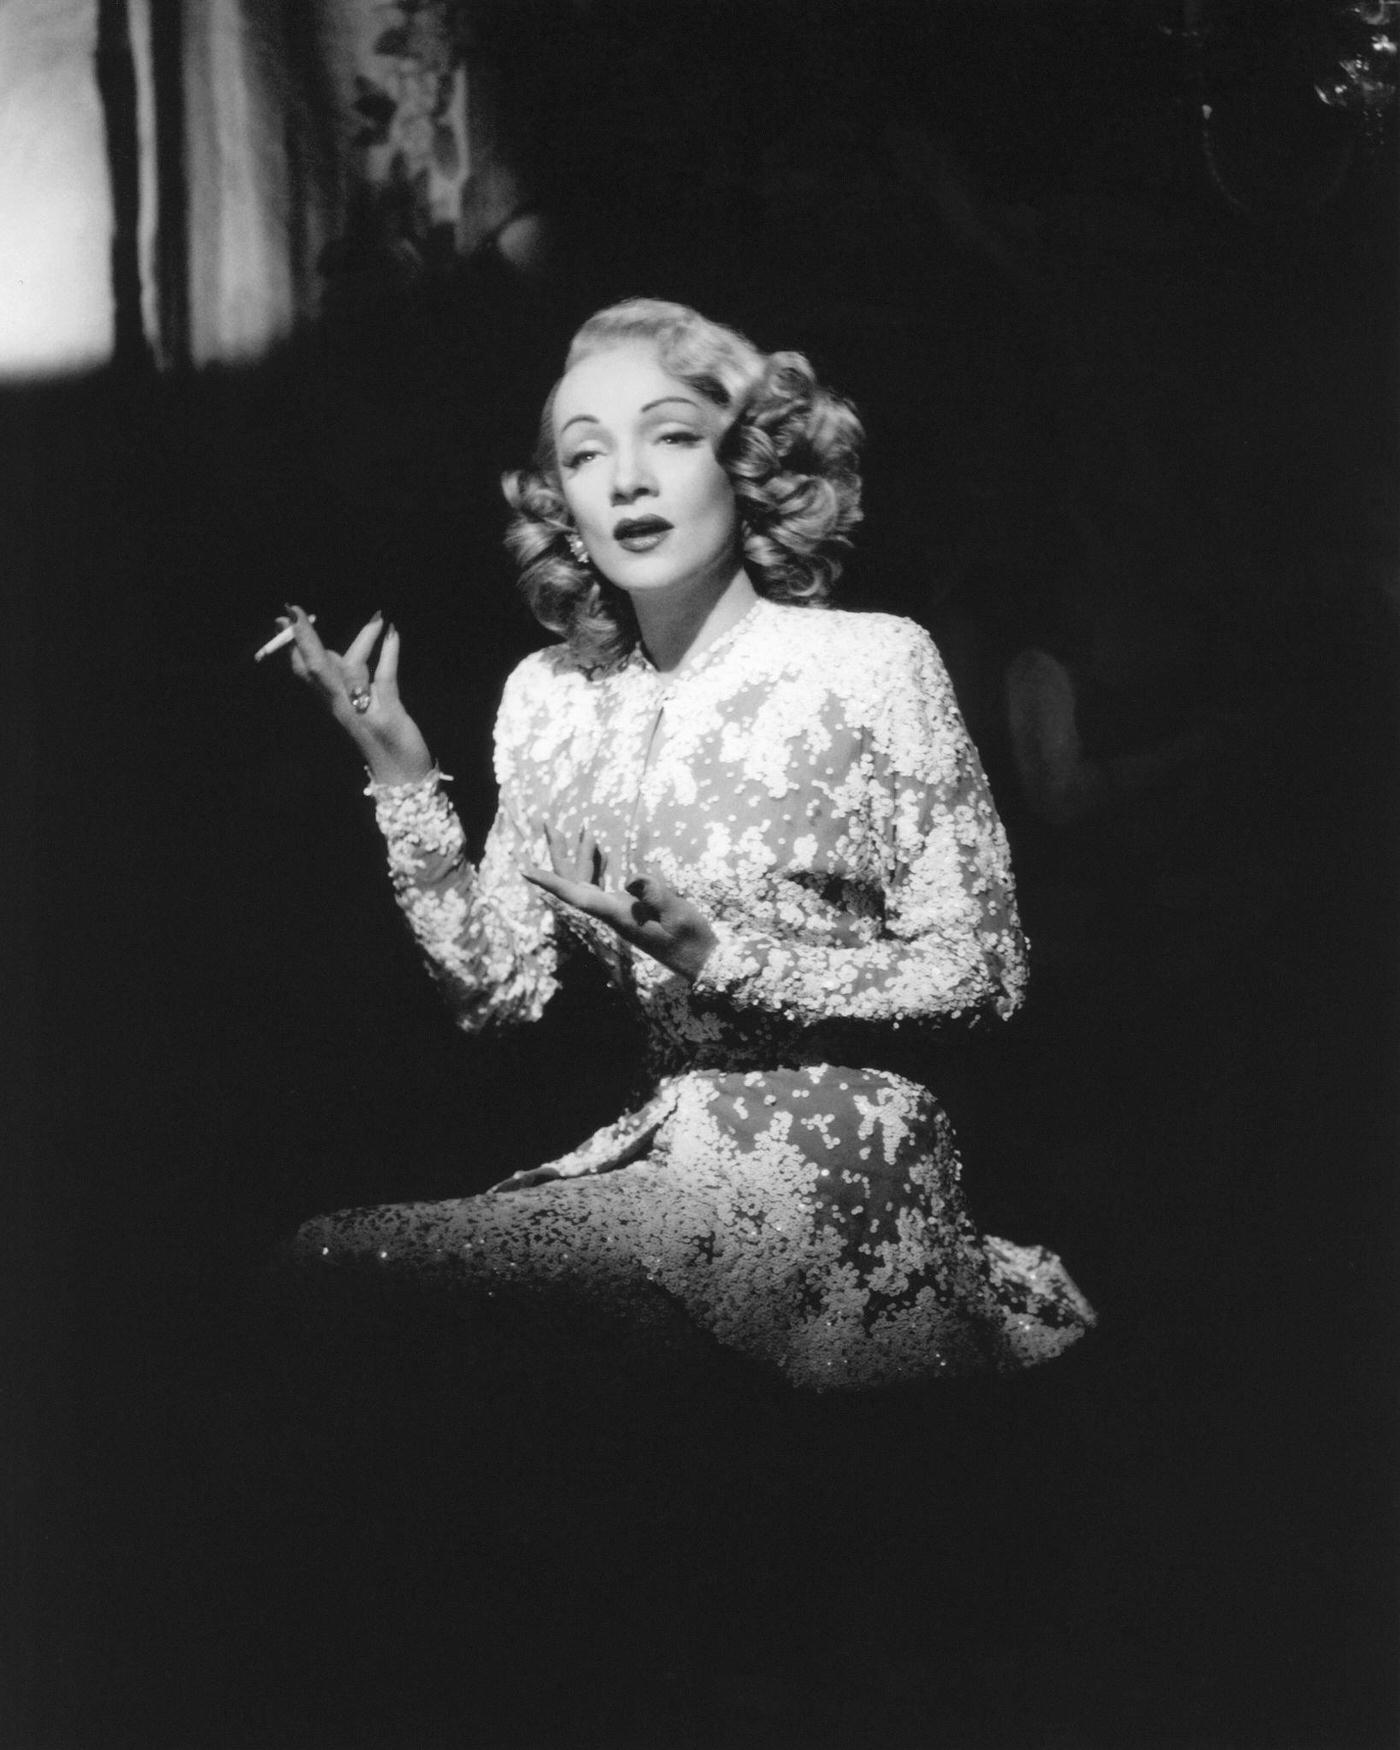 Marlene Dietrich is seen on the set of 'A Foreign Affair' in the 1940s.